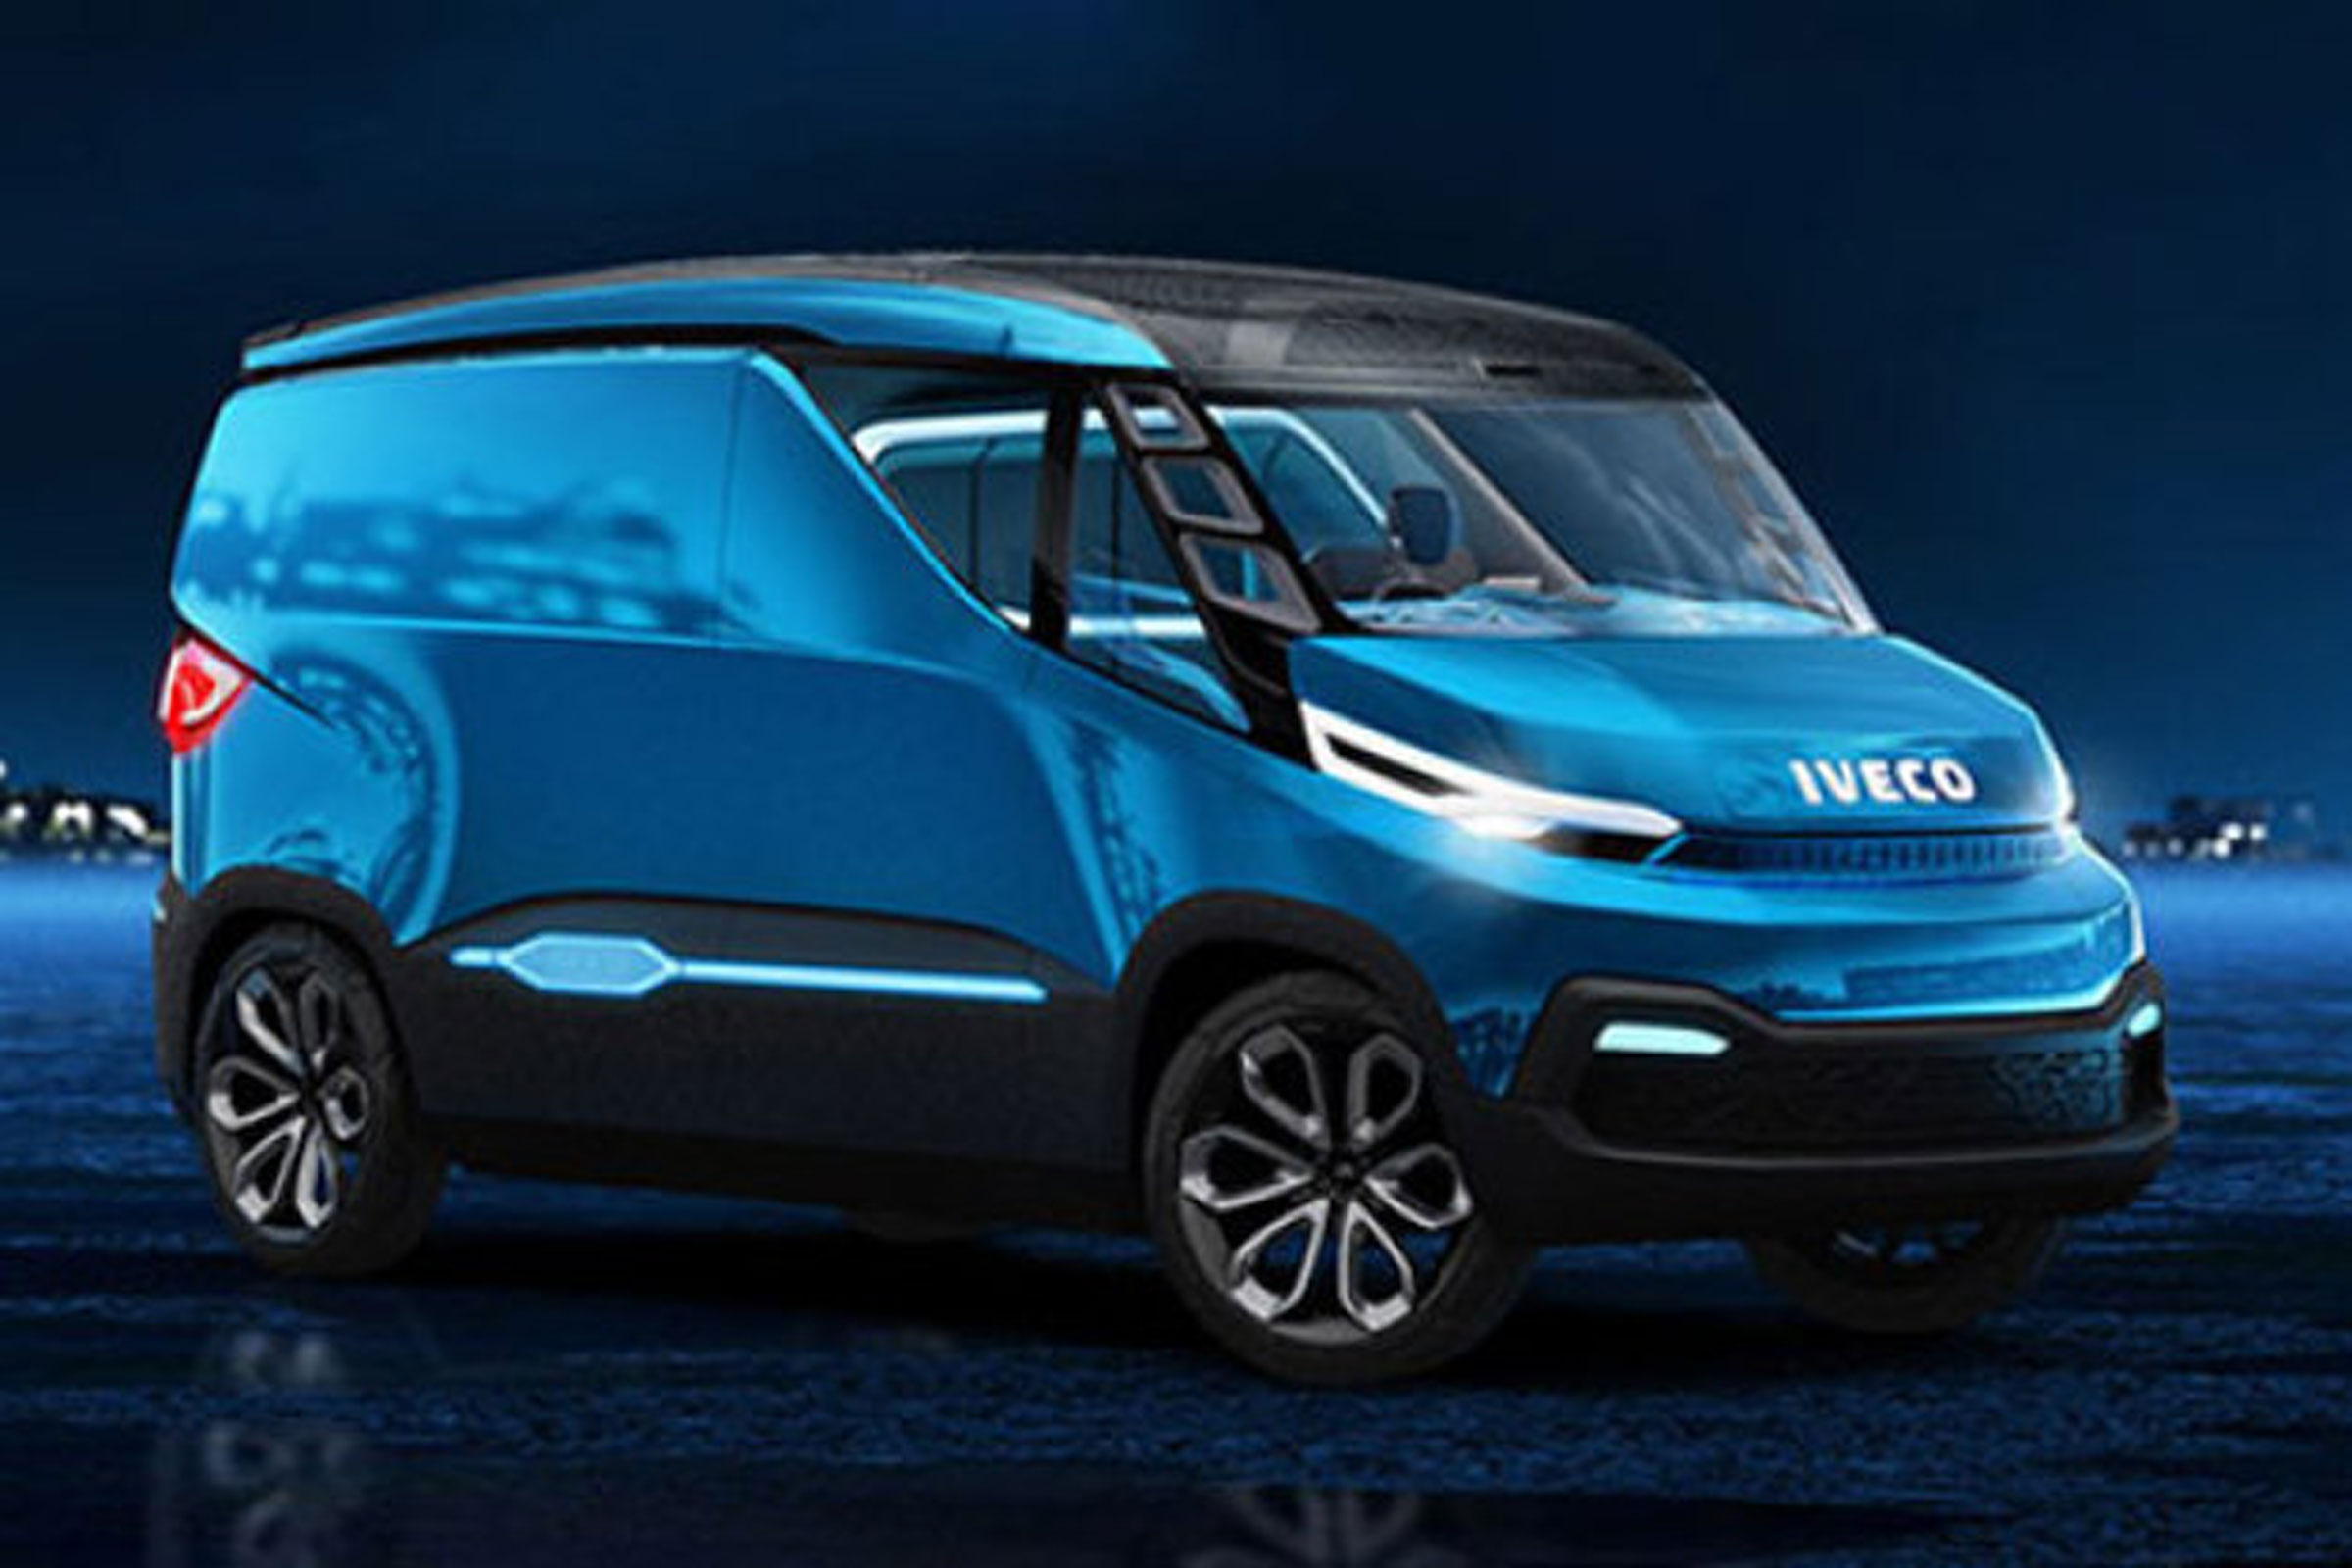 The van of the future Iveco VISION concept revealed Auto Express